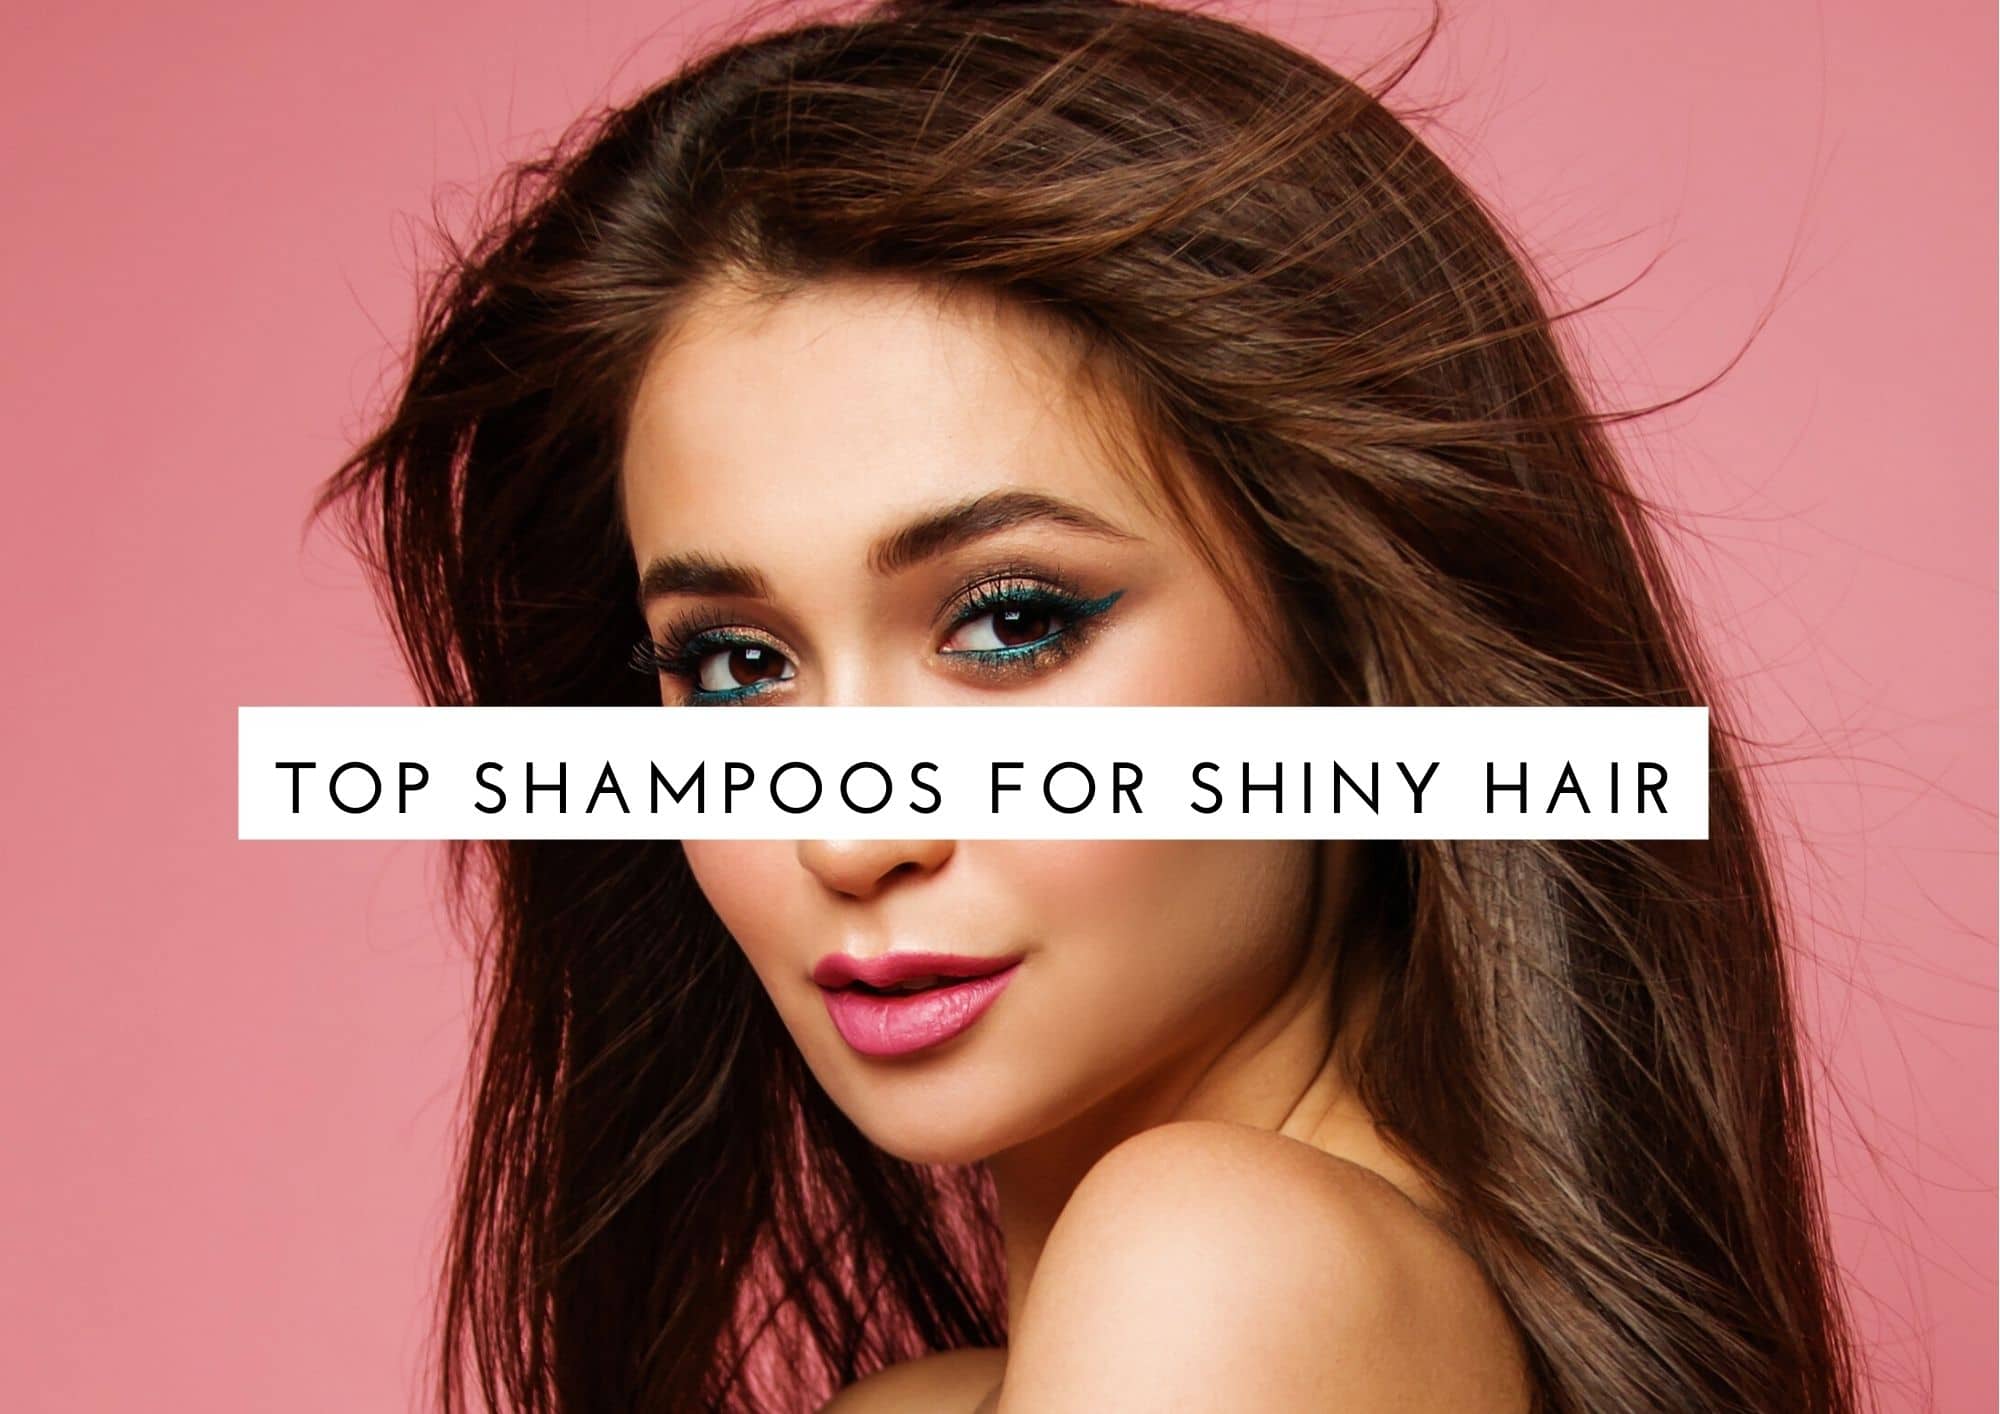 10 Best Shampoo For Shiny Hair 2023 - Hair Everyday Review